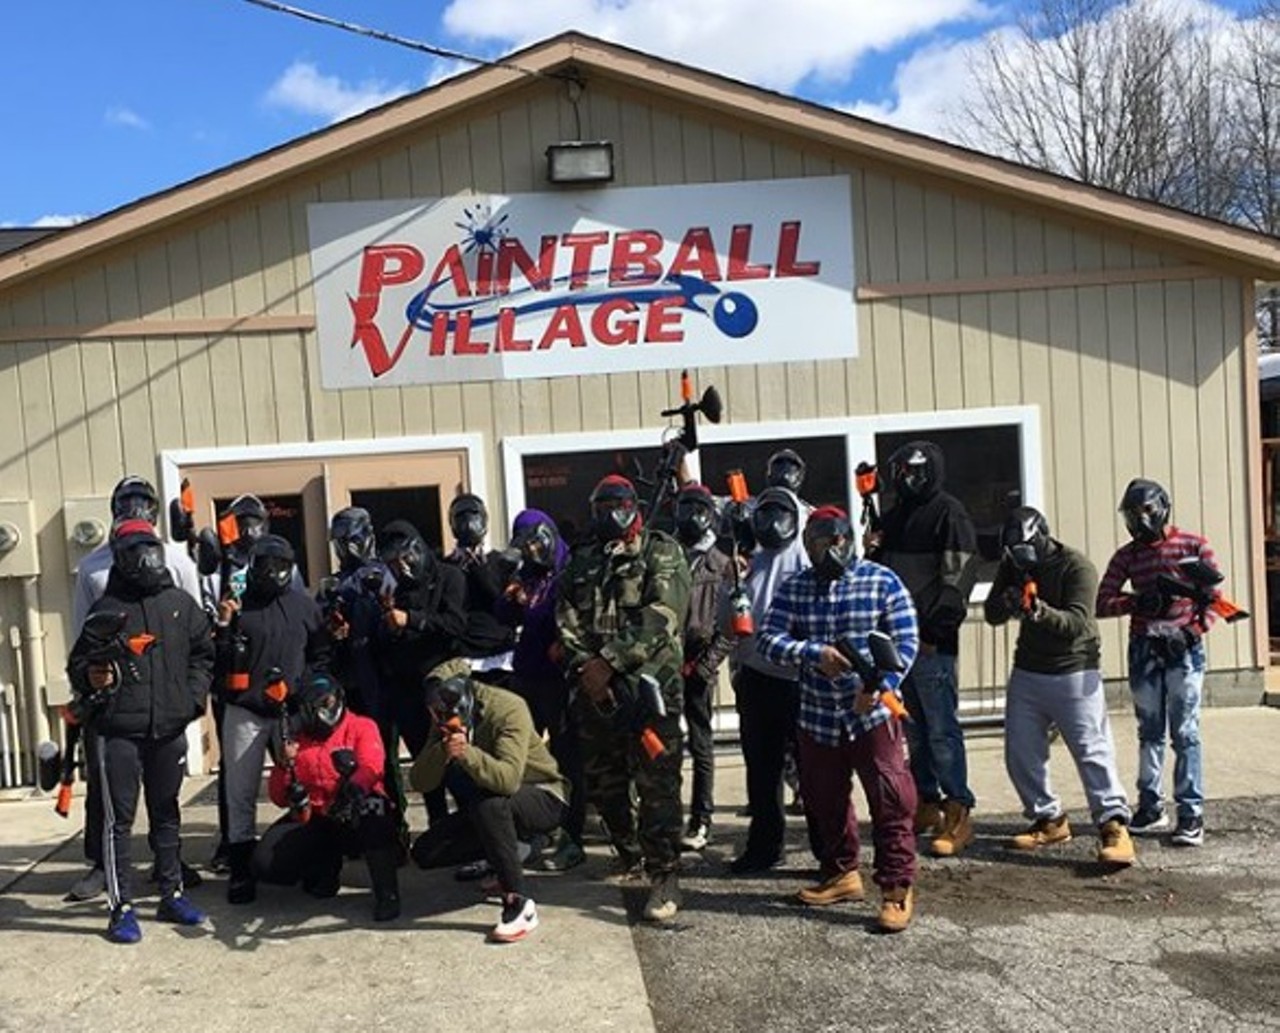 Paintball at Swings N Things
8501 Stearns Rd., Olmsted Falls, 440-235-4420 
If the two of you need to let out some aggression, then check out this paintball course, perfect for shooting paintballs at your favorite person. This attractions makes for a different kind of date, but there are always the games, putt putt and go-karts afterwards to enjoy. 
Photo via lvrob2016/Instagram